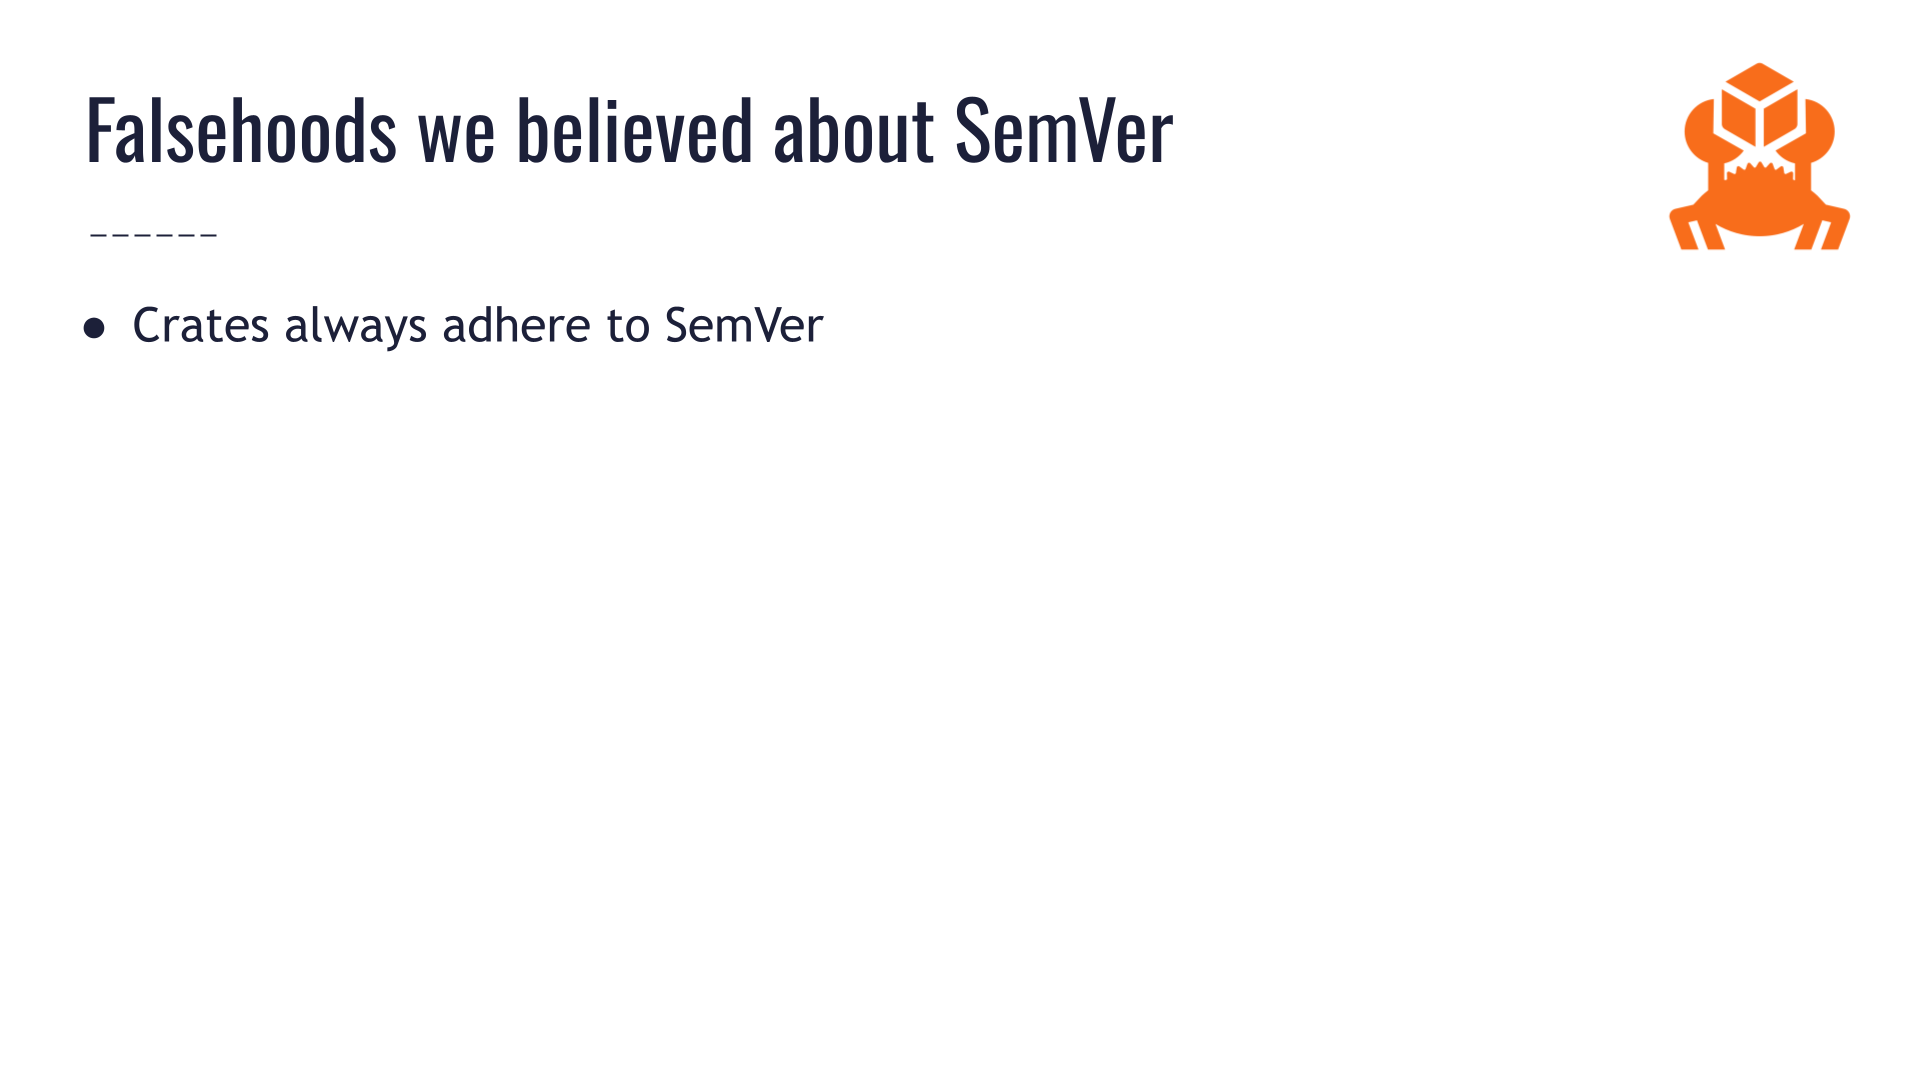 Slide titled "Falsehoods we believed about SemVer." First bullet point: crates always adhere to SemVer. There is copious space left over on the slide, hinting that there will many more items on the list by the end of the talk.